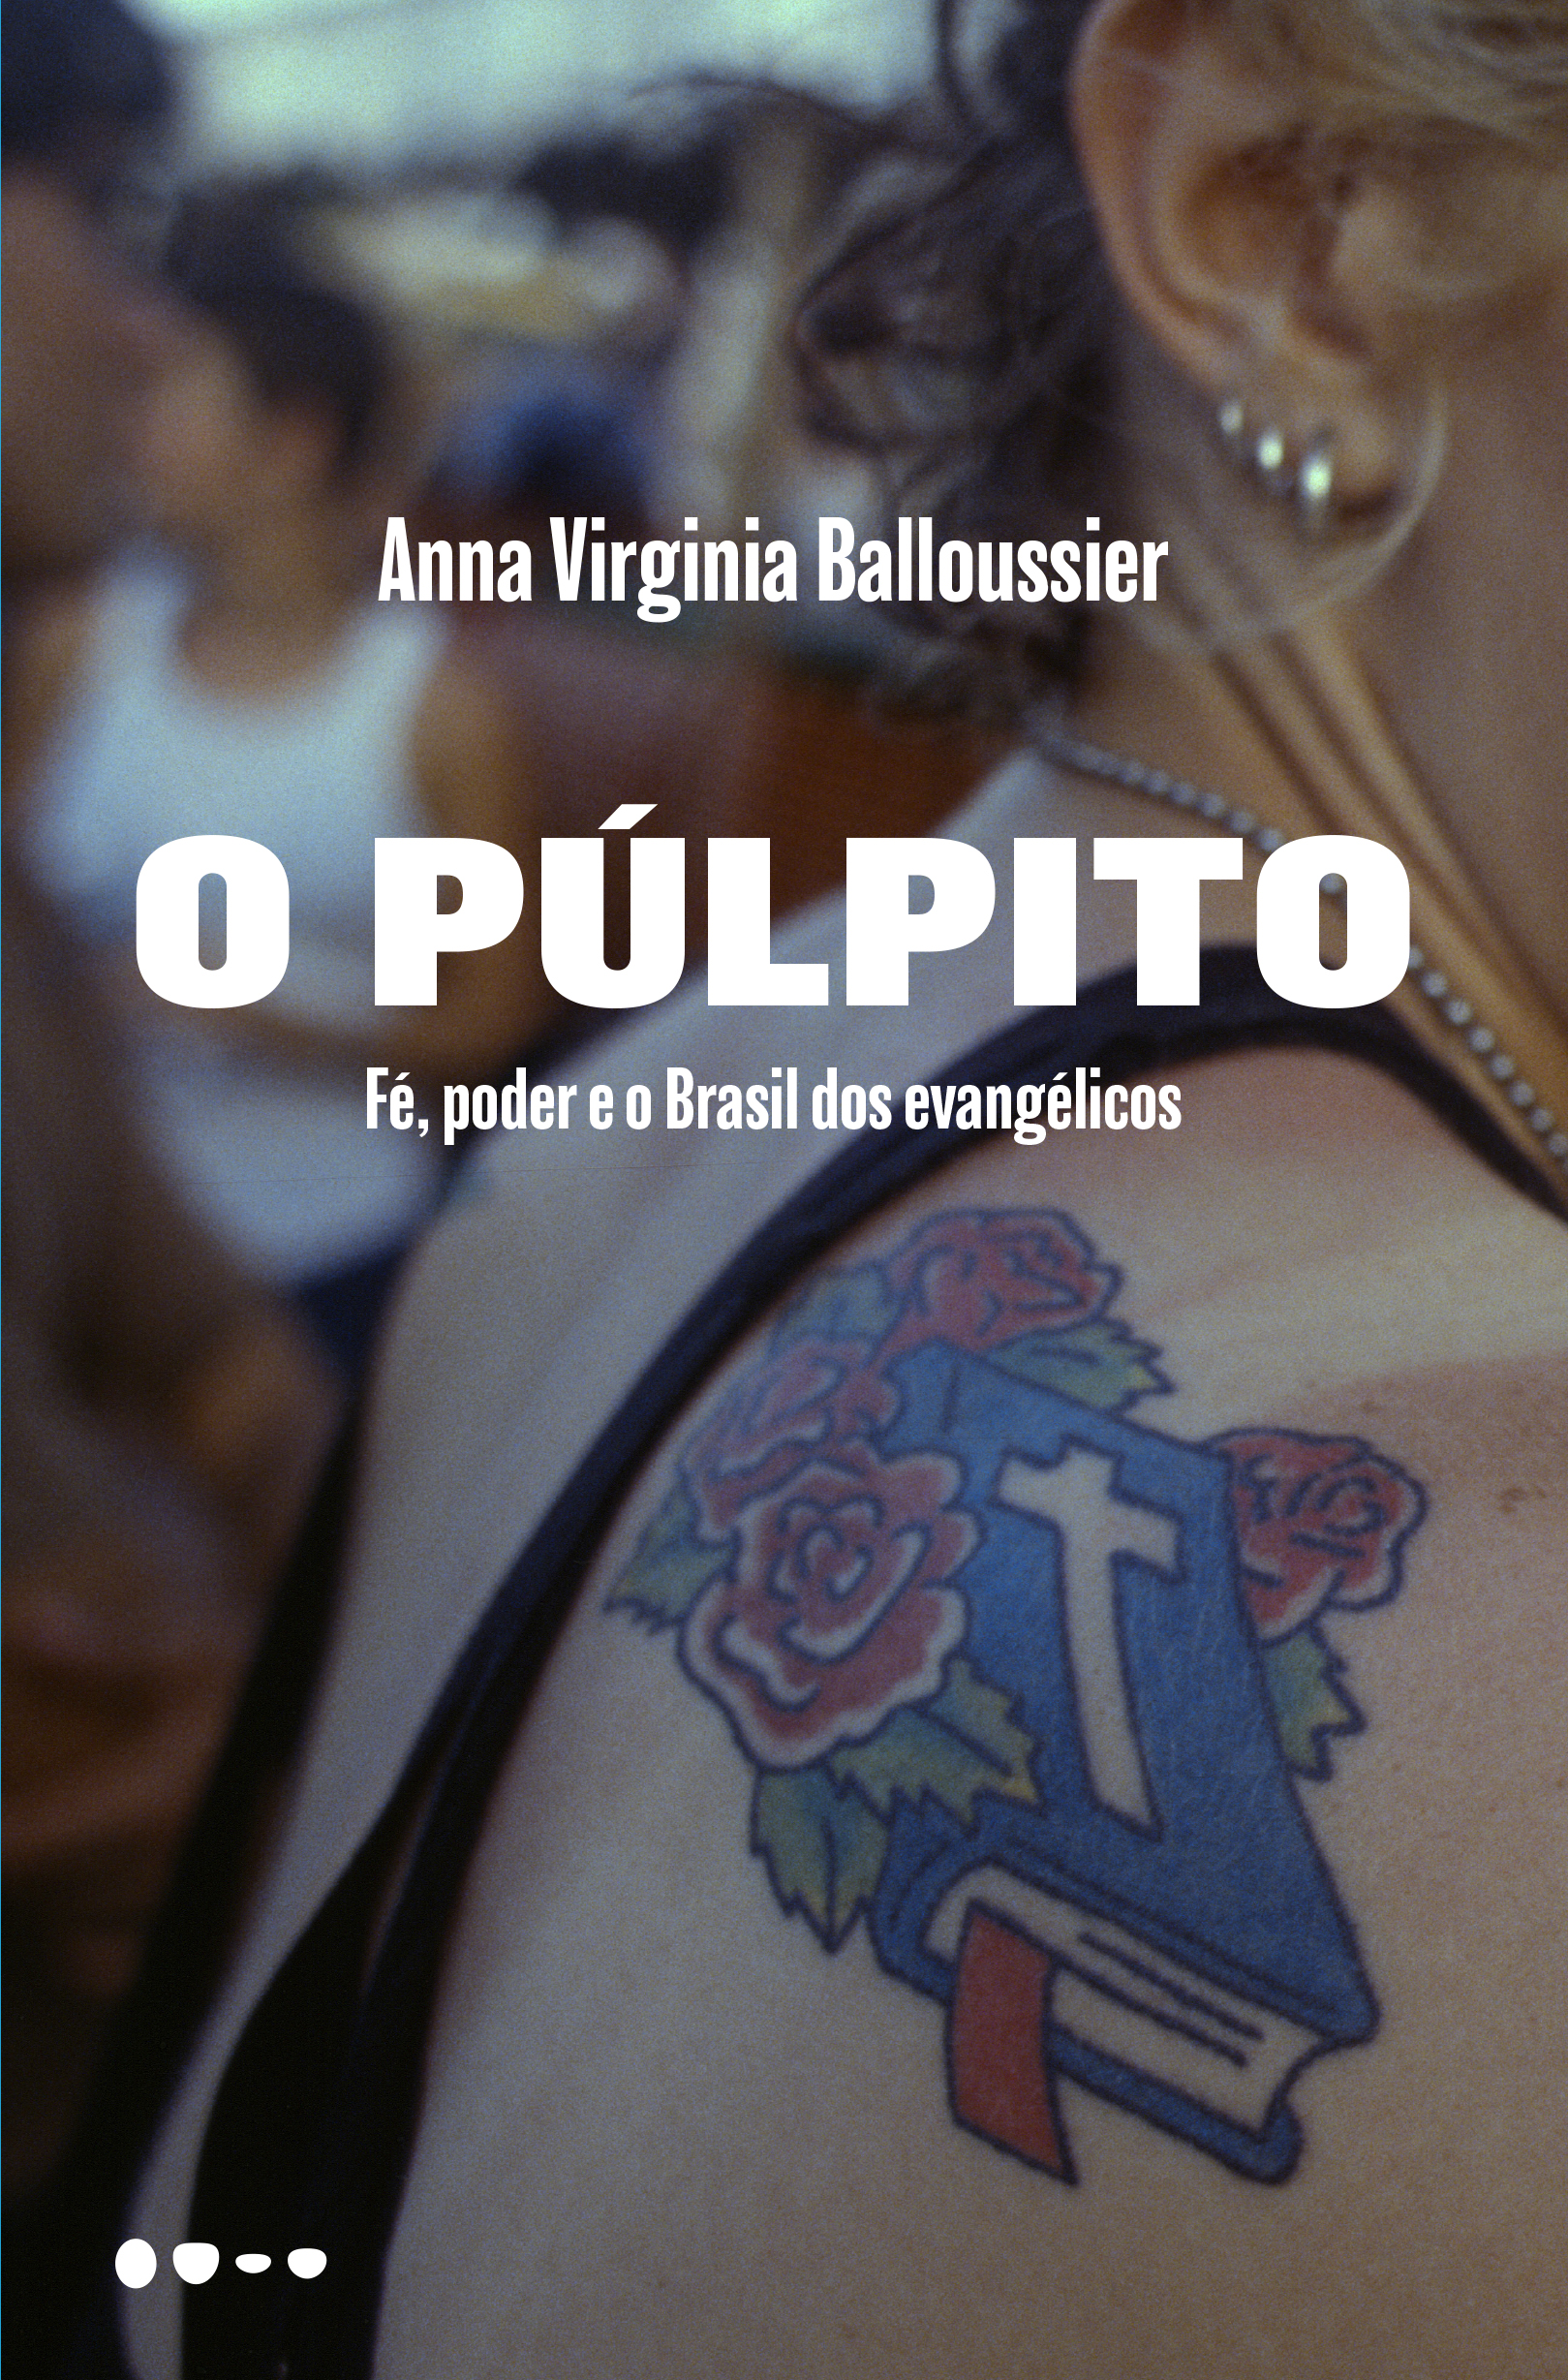 The cover of "O Púlpito", a recently released book by Brazilian journalist Anna Virginia Balloussier. The cover features the upper back of a woman with a tattoo of a Bible within roses